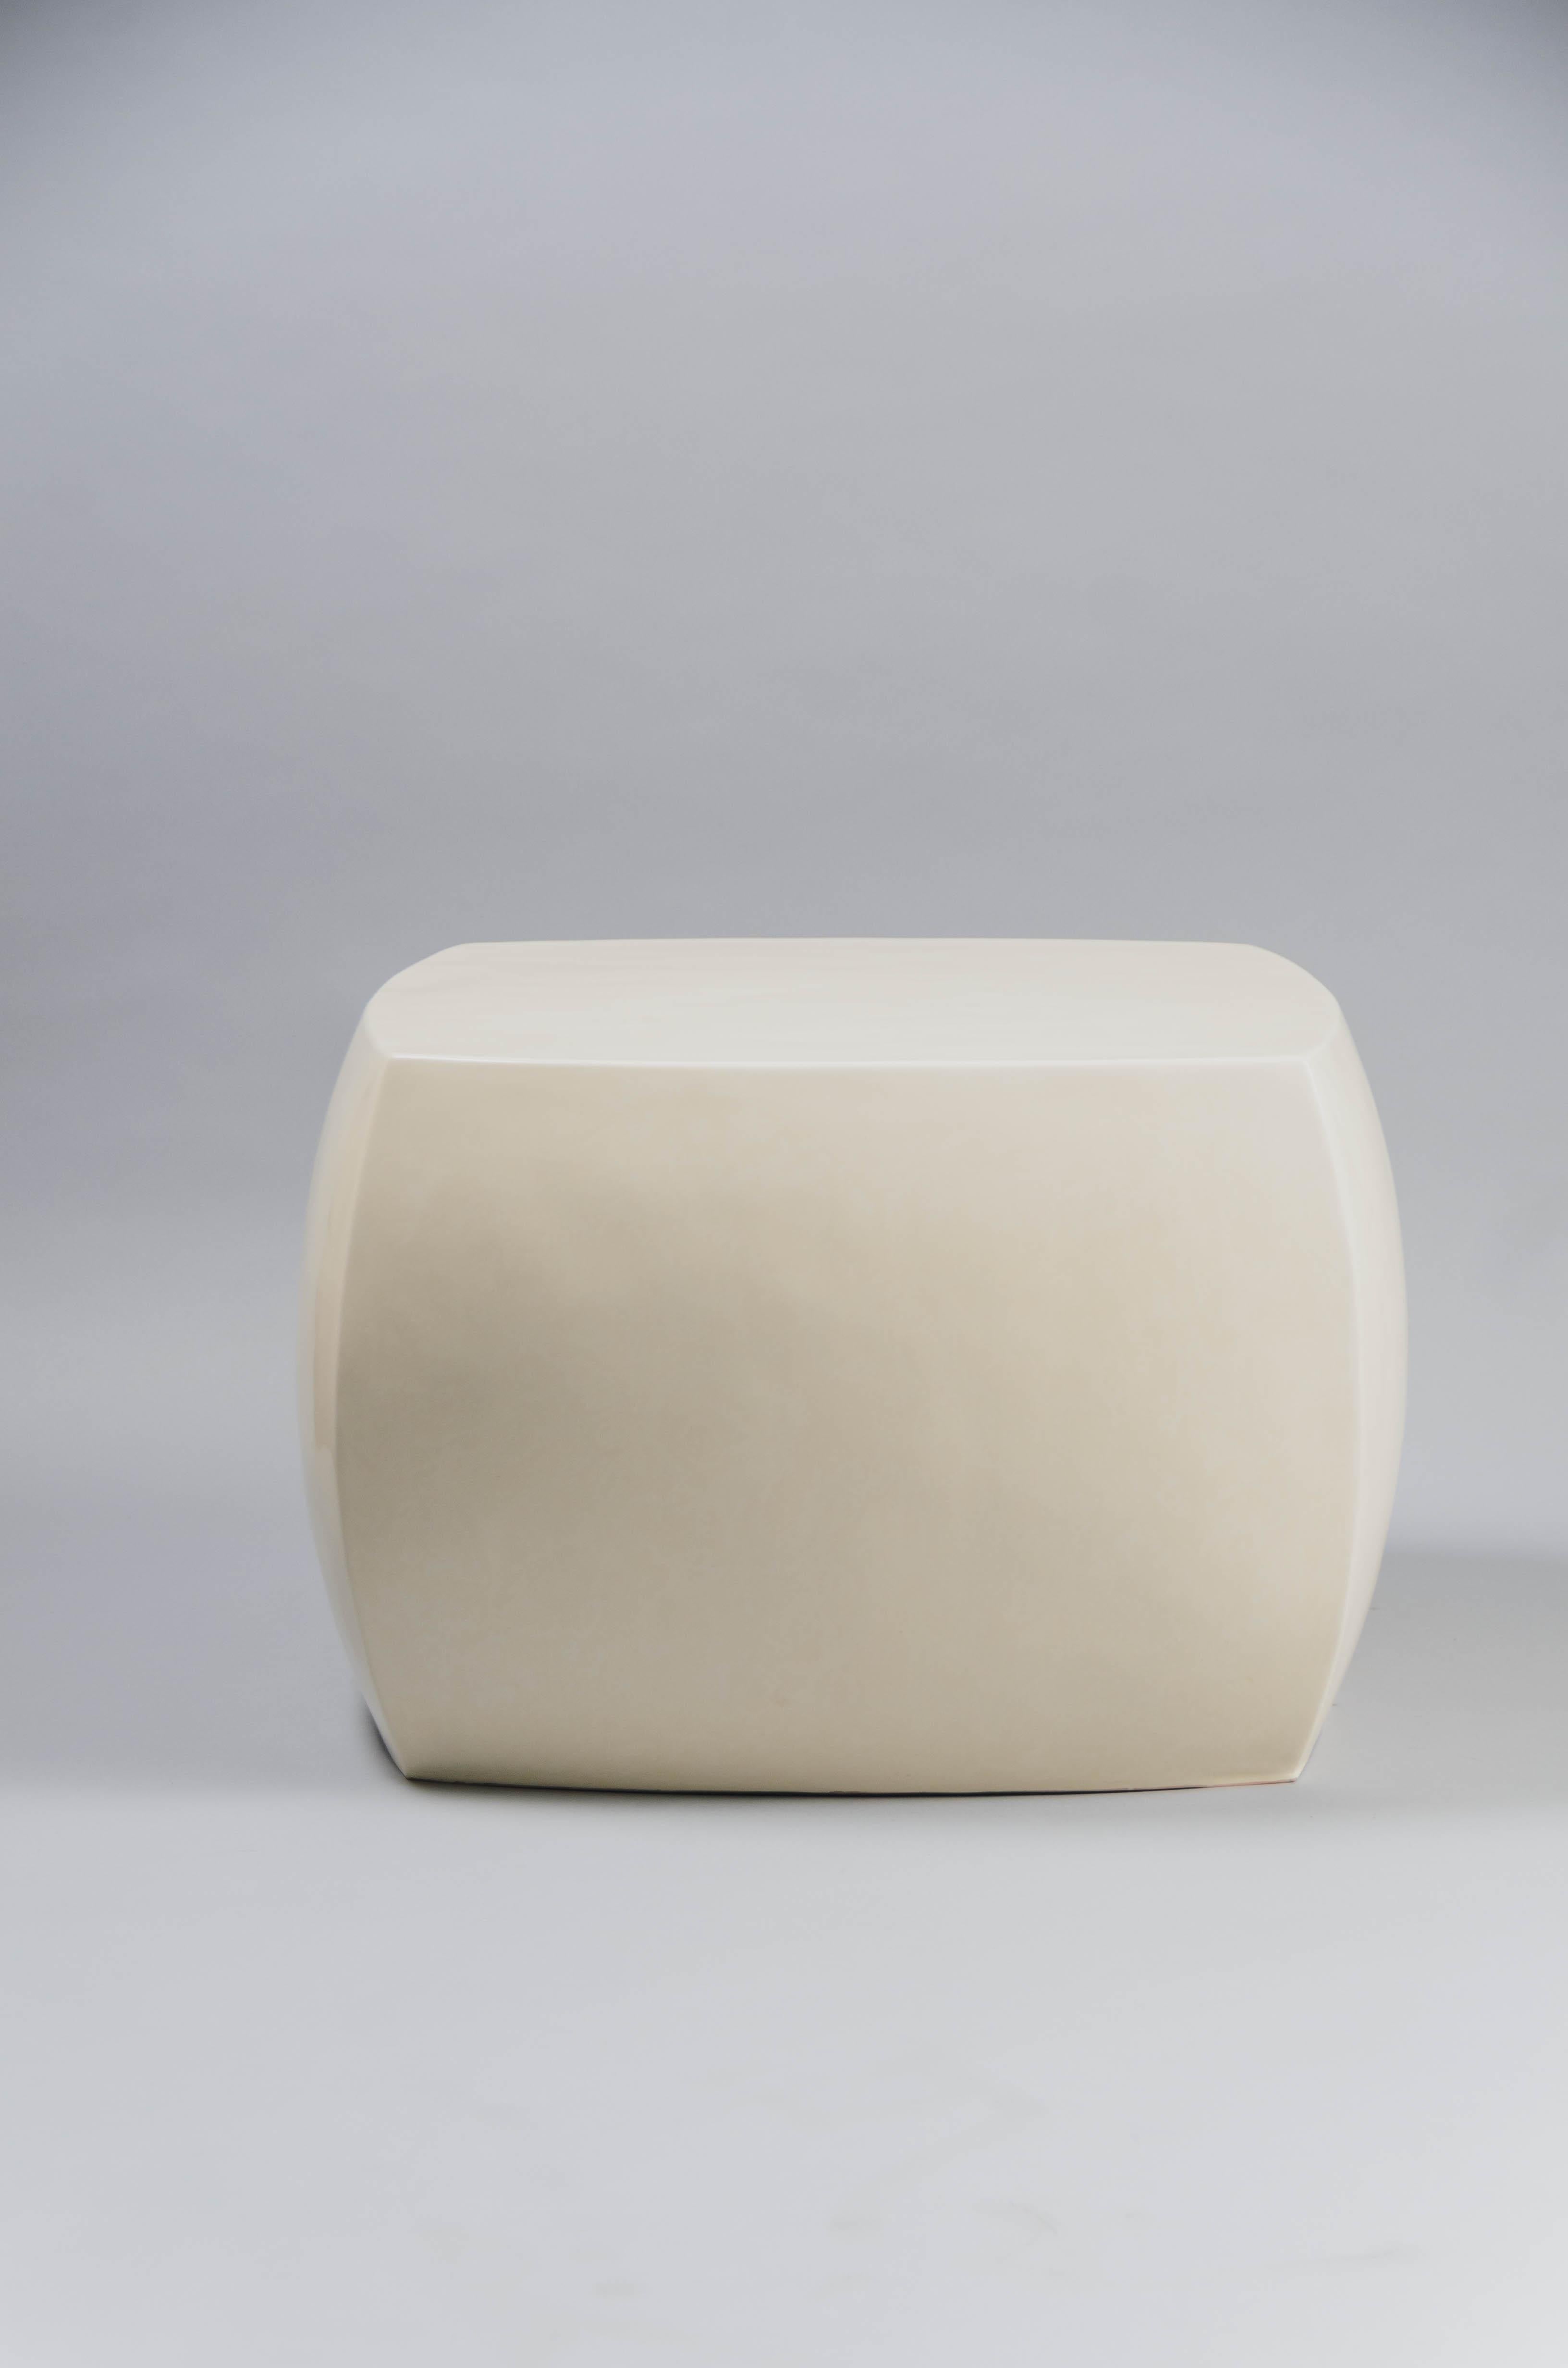 Rounded square drumstool
Cream Lacquer
Hand Repoussé
Contemporary
21 1/4